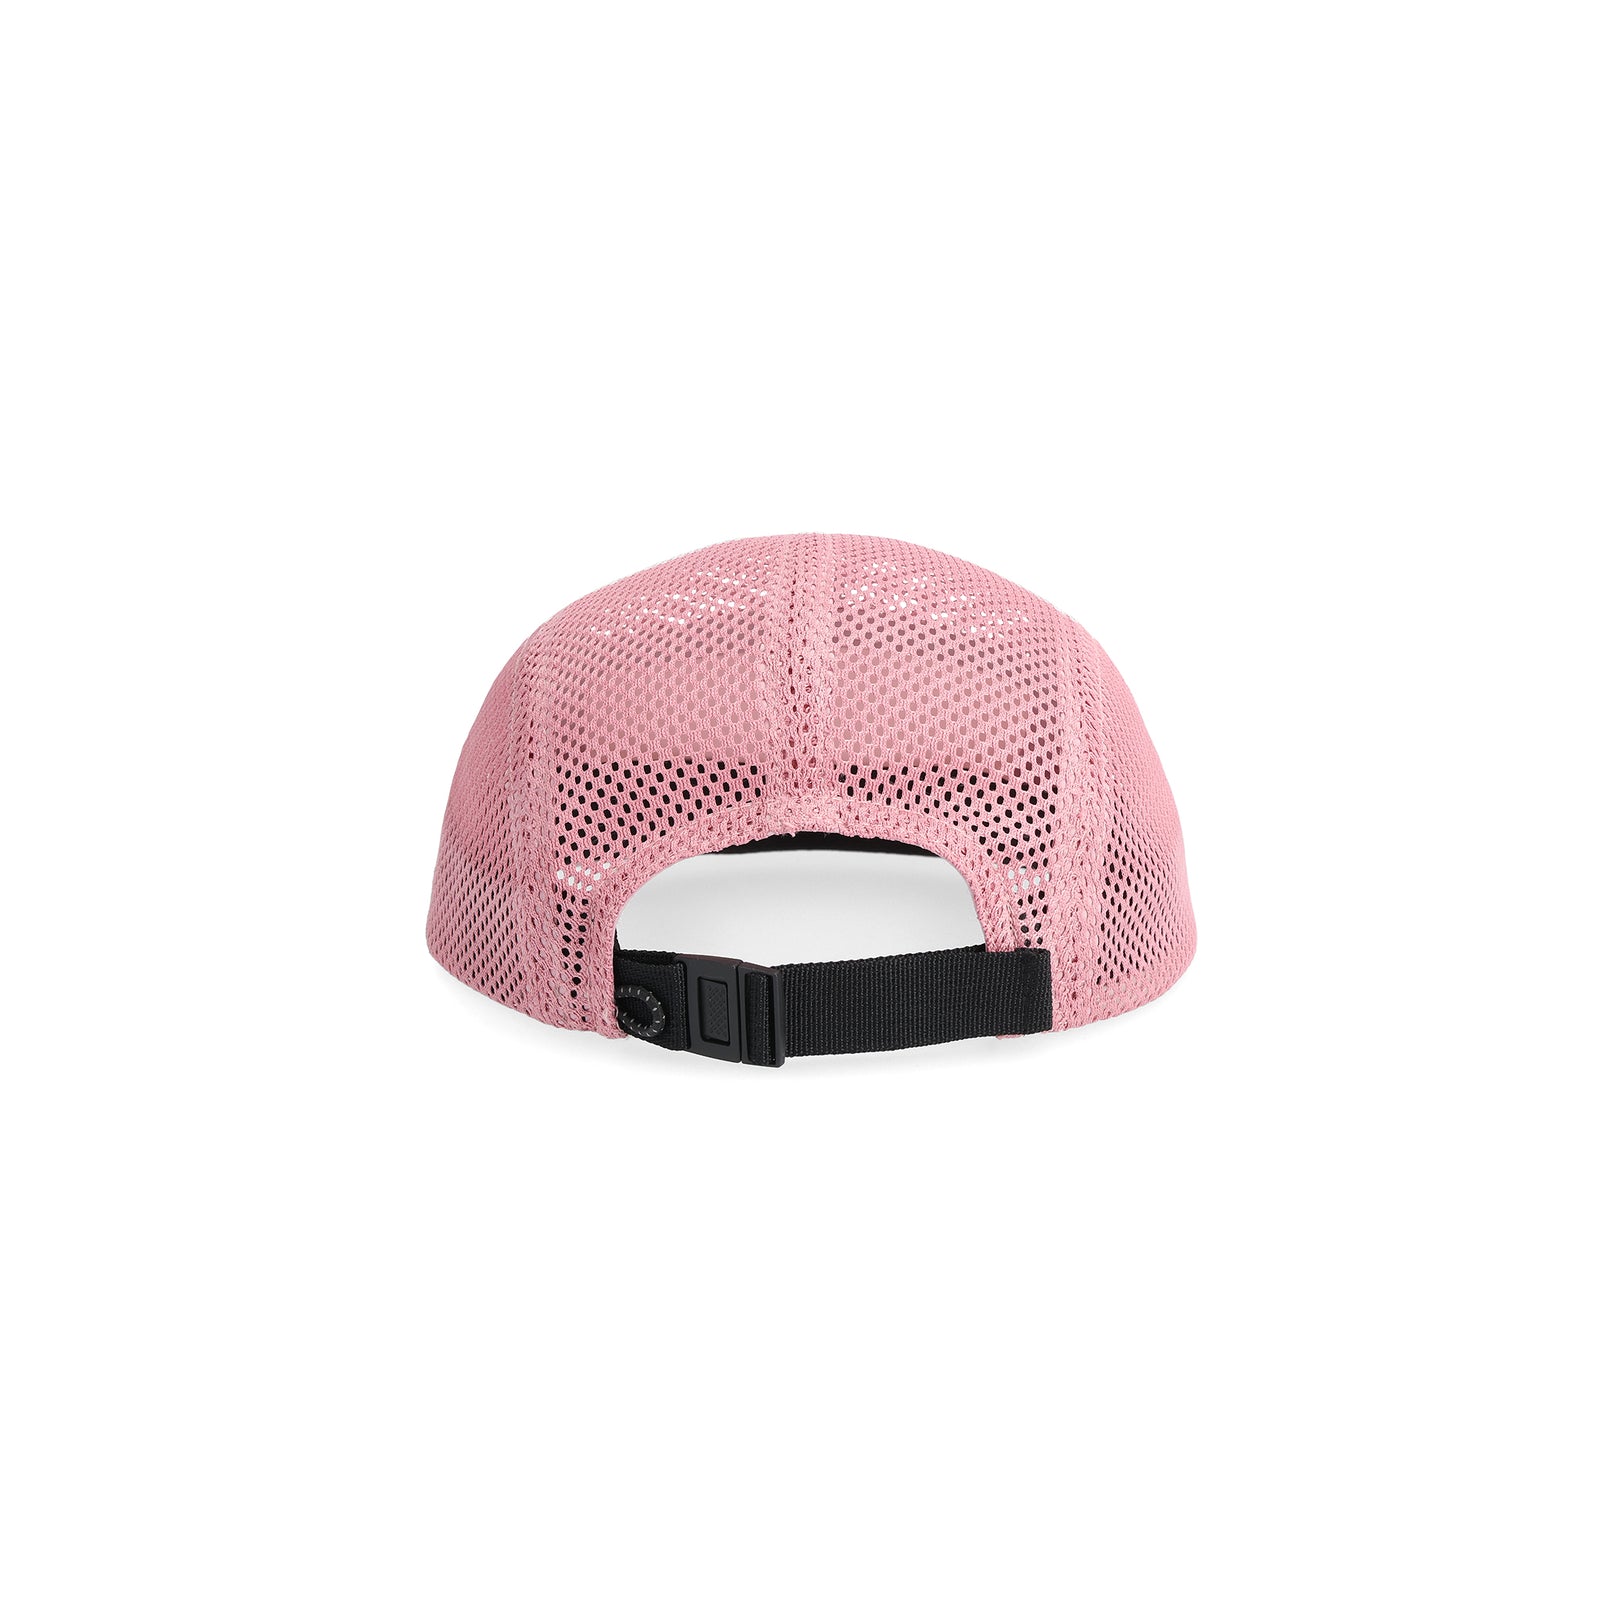 Back View of Topo Designs Global Hat in "Rose"